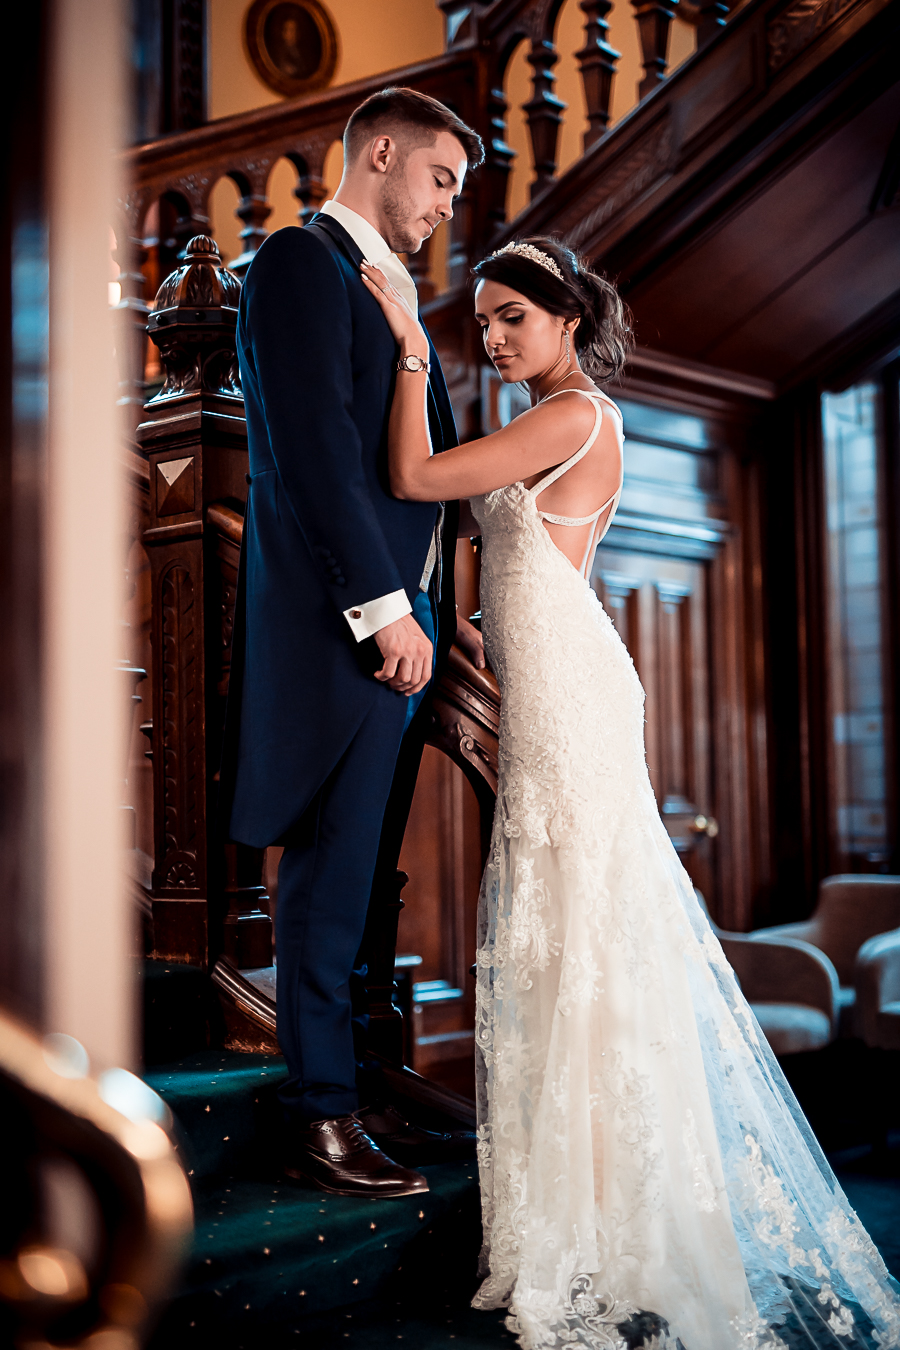 Real wedding at Chateau Impney classic glamorous style, Nicholas Rogers Photography (34)